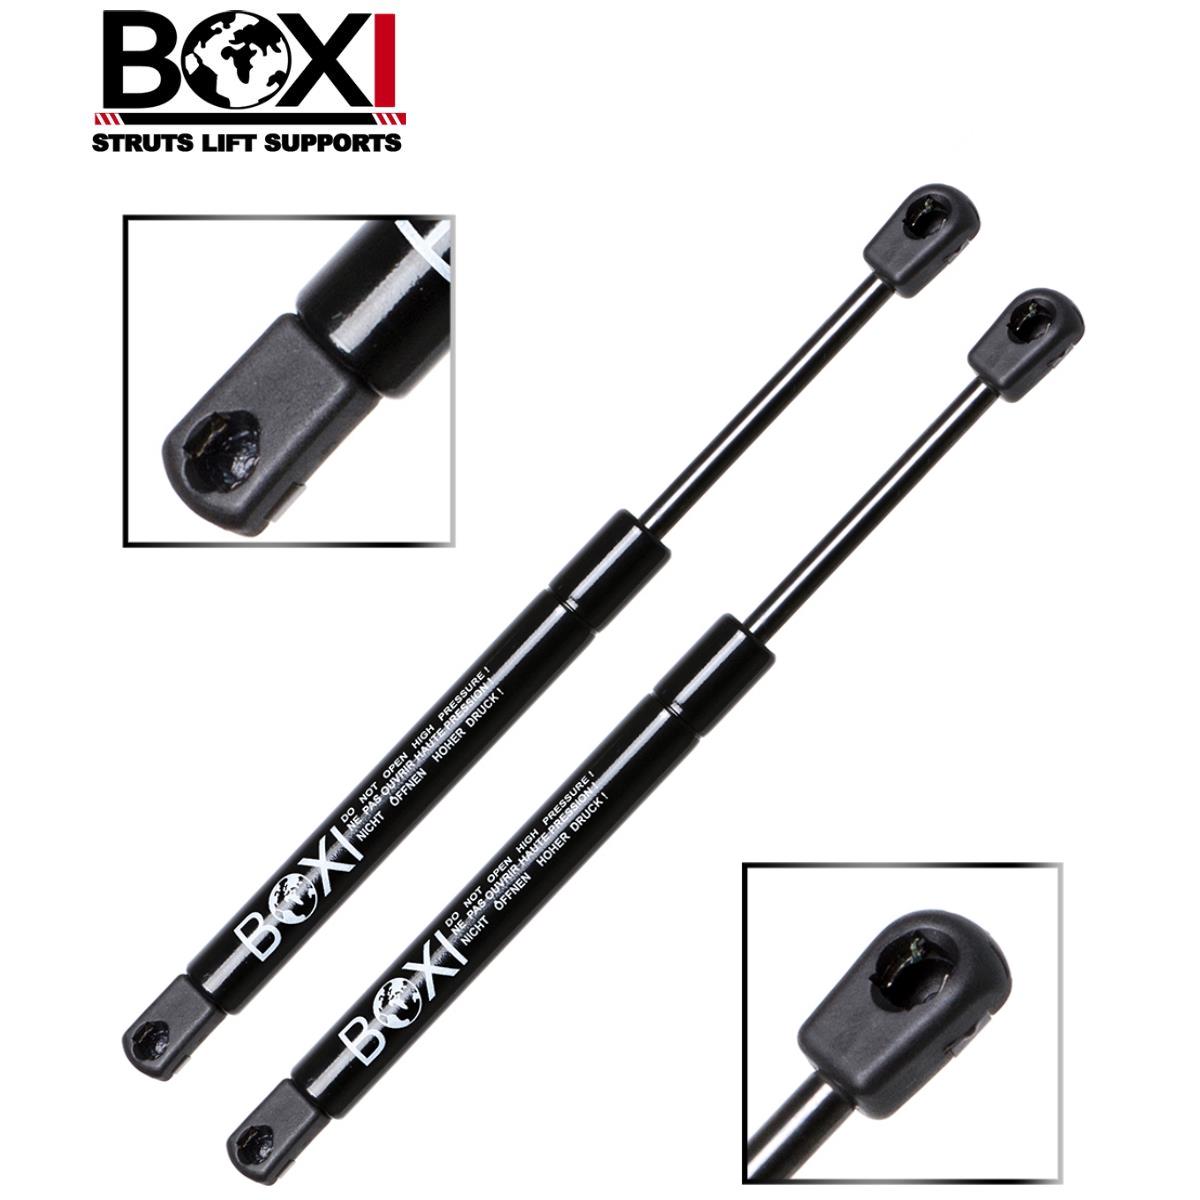 GS350 2005-2012 GS430 2006-2012 GS350H 2007-2012 BOXI 2 Pcs Front Hood Lift Supports Struts Shocks Spring Dampers For Lexus GS300 2005-2007 GS450h 2007-2012 GS460 2008-2012 Hood 6653,534400W090